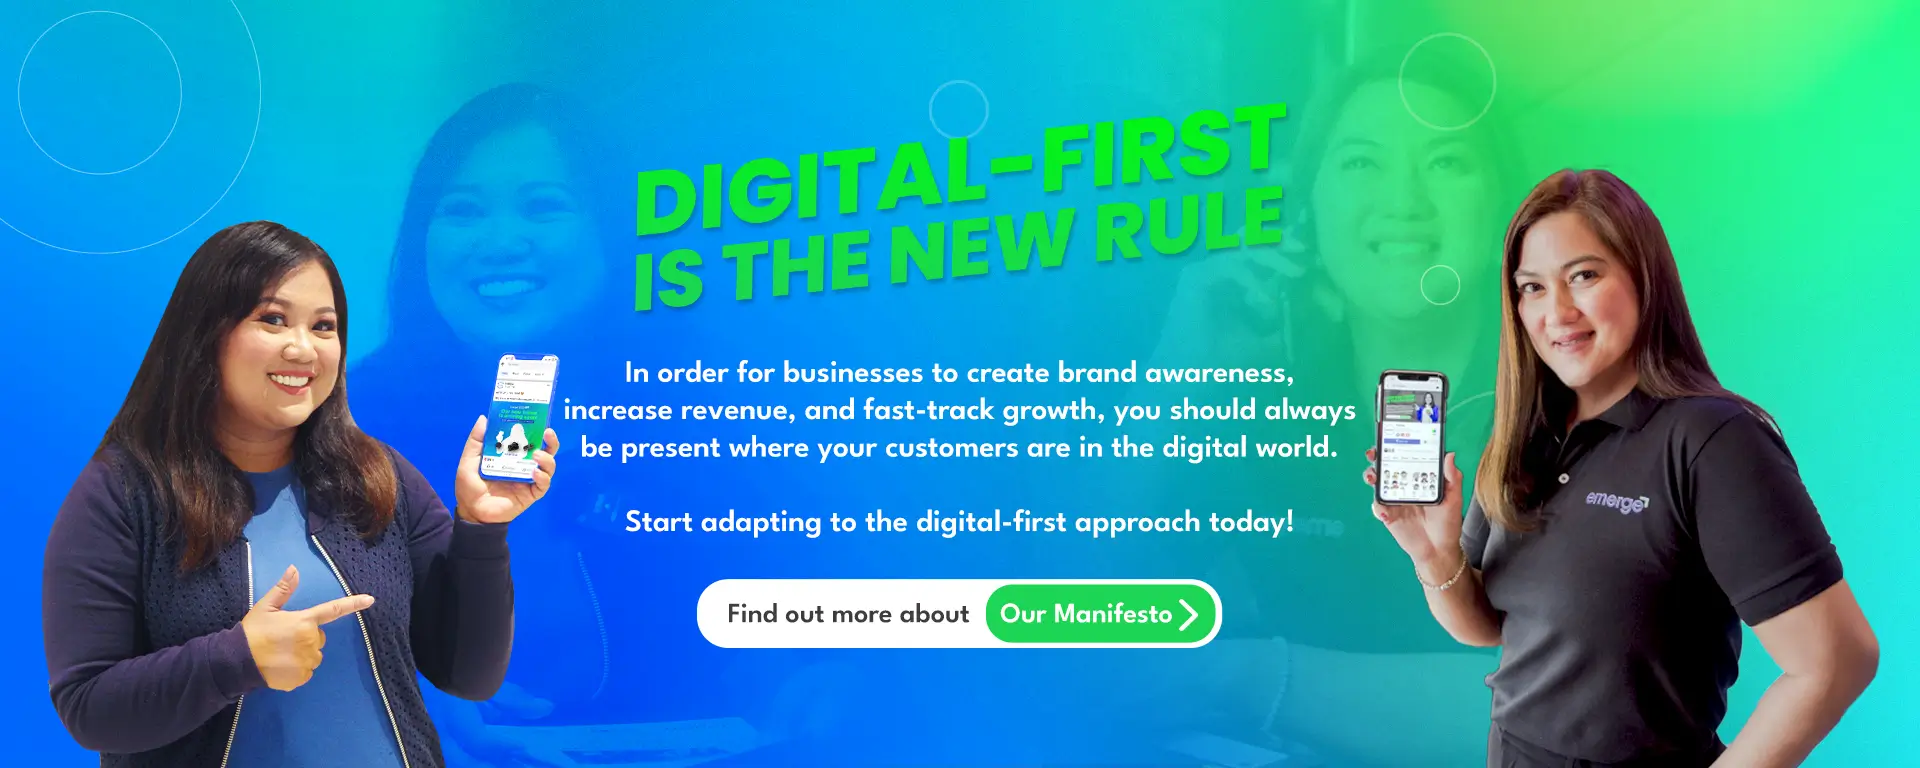 Digital-First Is The New Rule